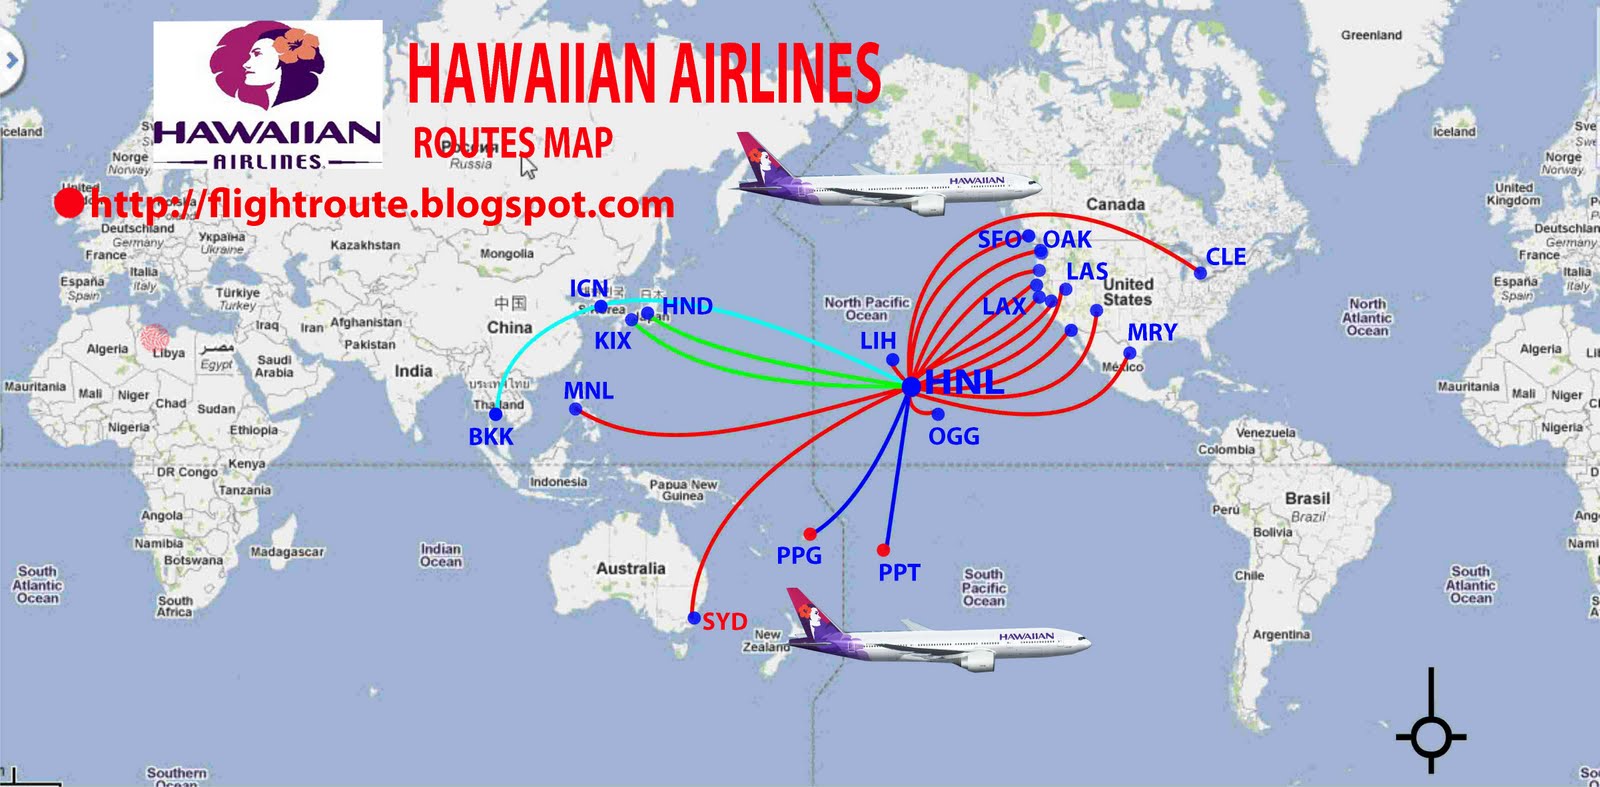 routes map: Hawaiian Airlines routes map